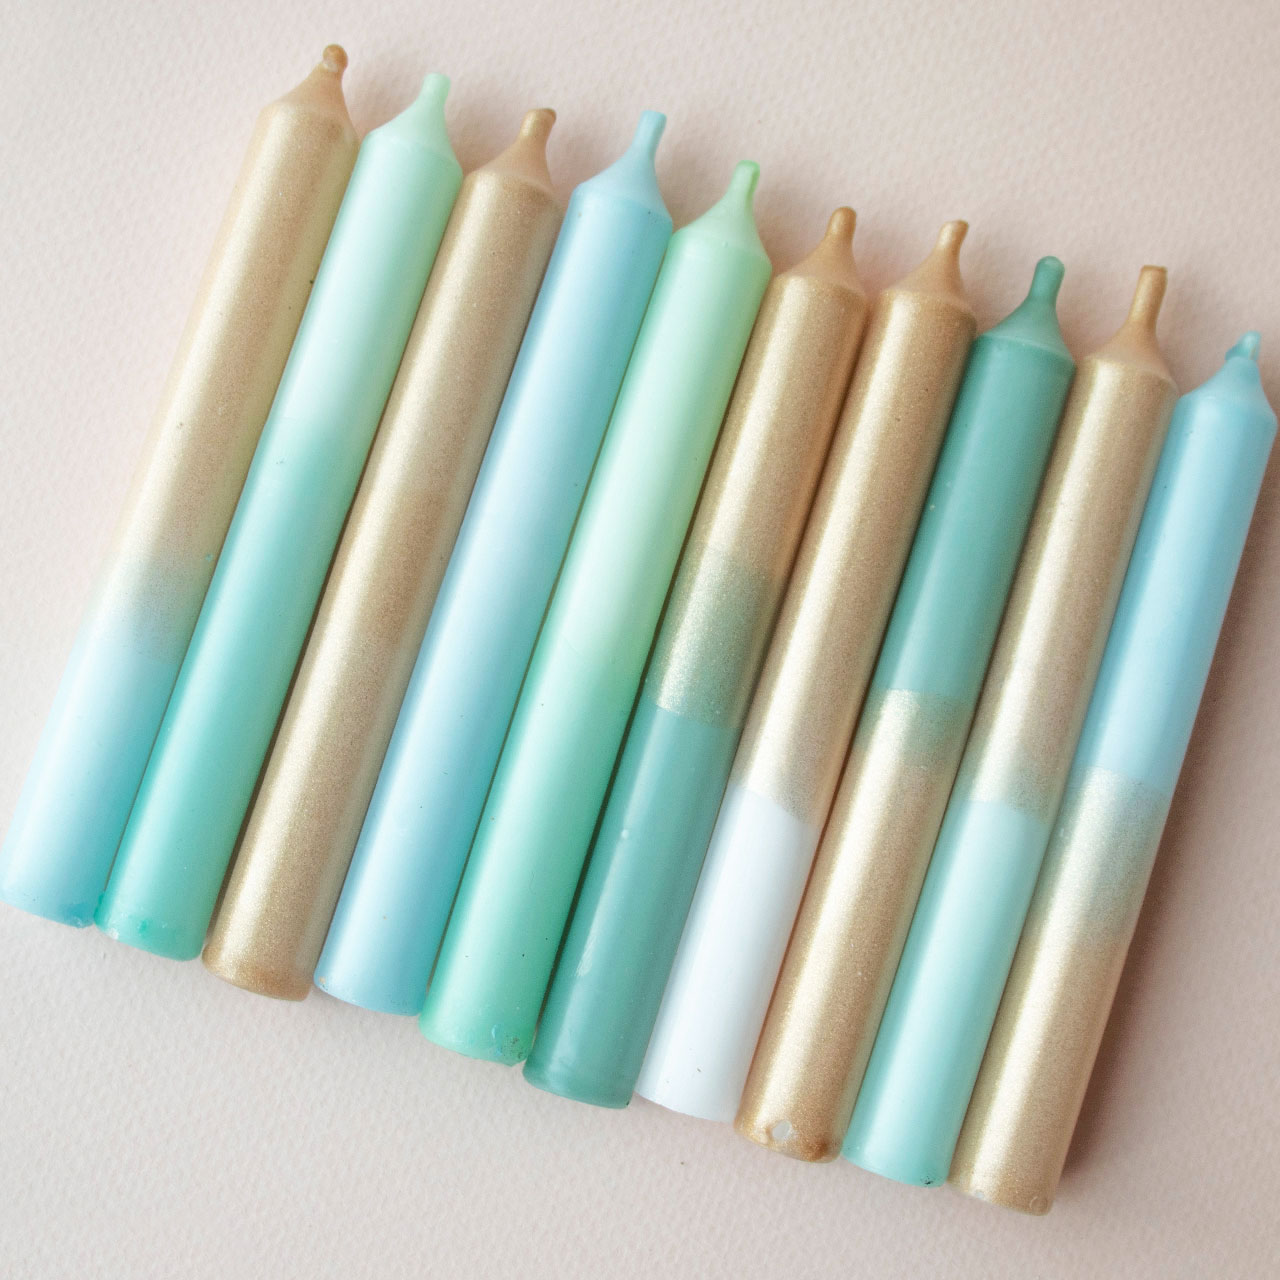 Candles - Mint, Turquoise & Gold